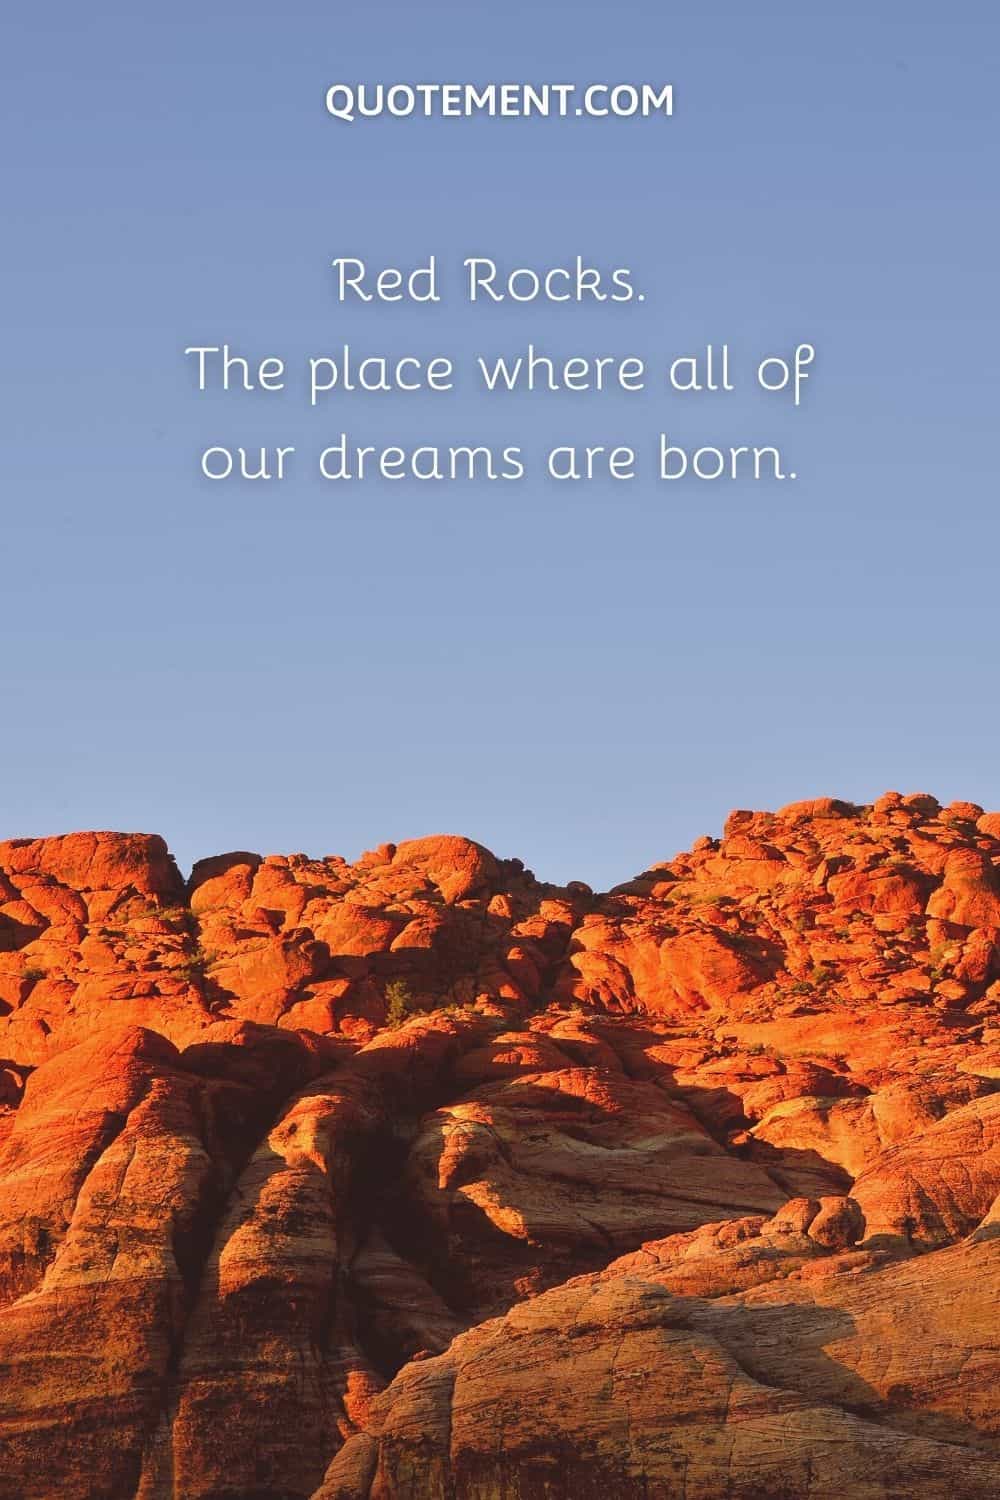 Red Rocks. The place where all of our dreams are born.